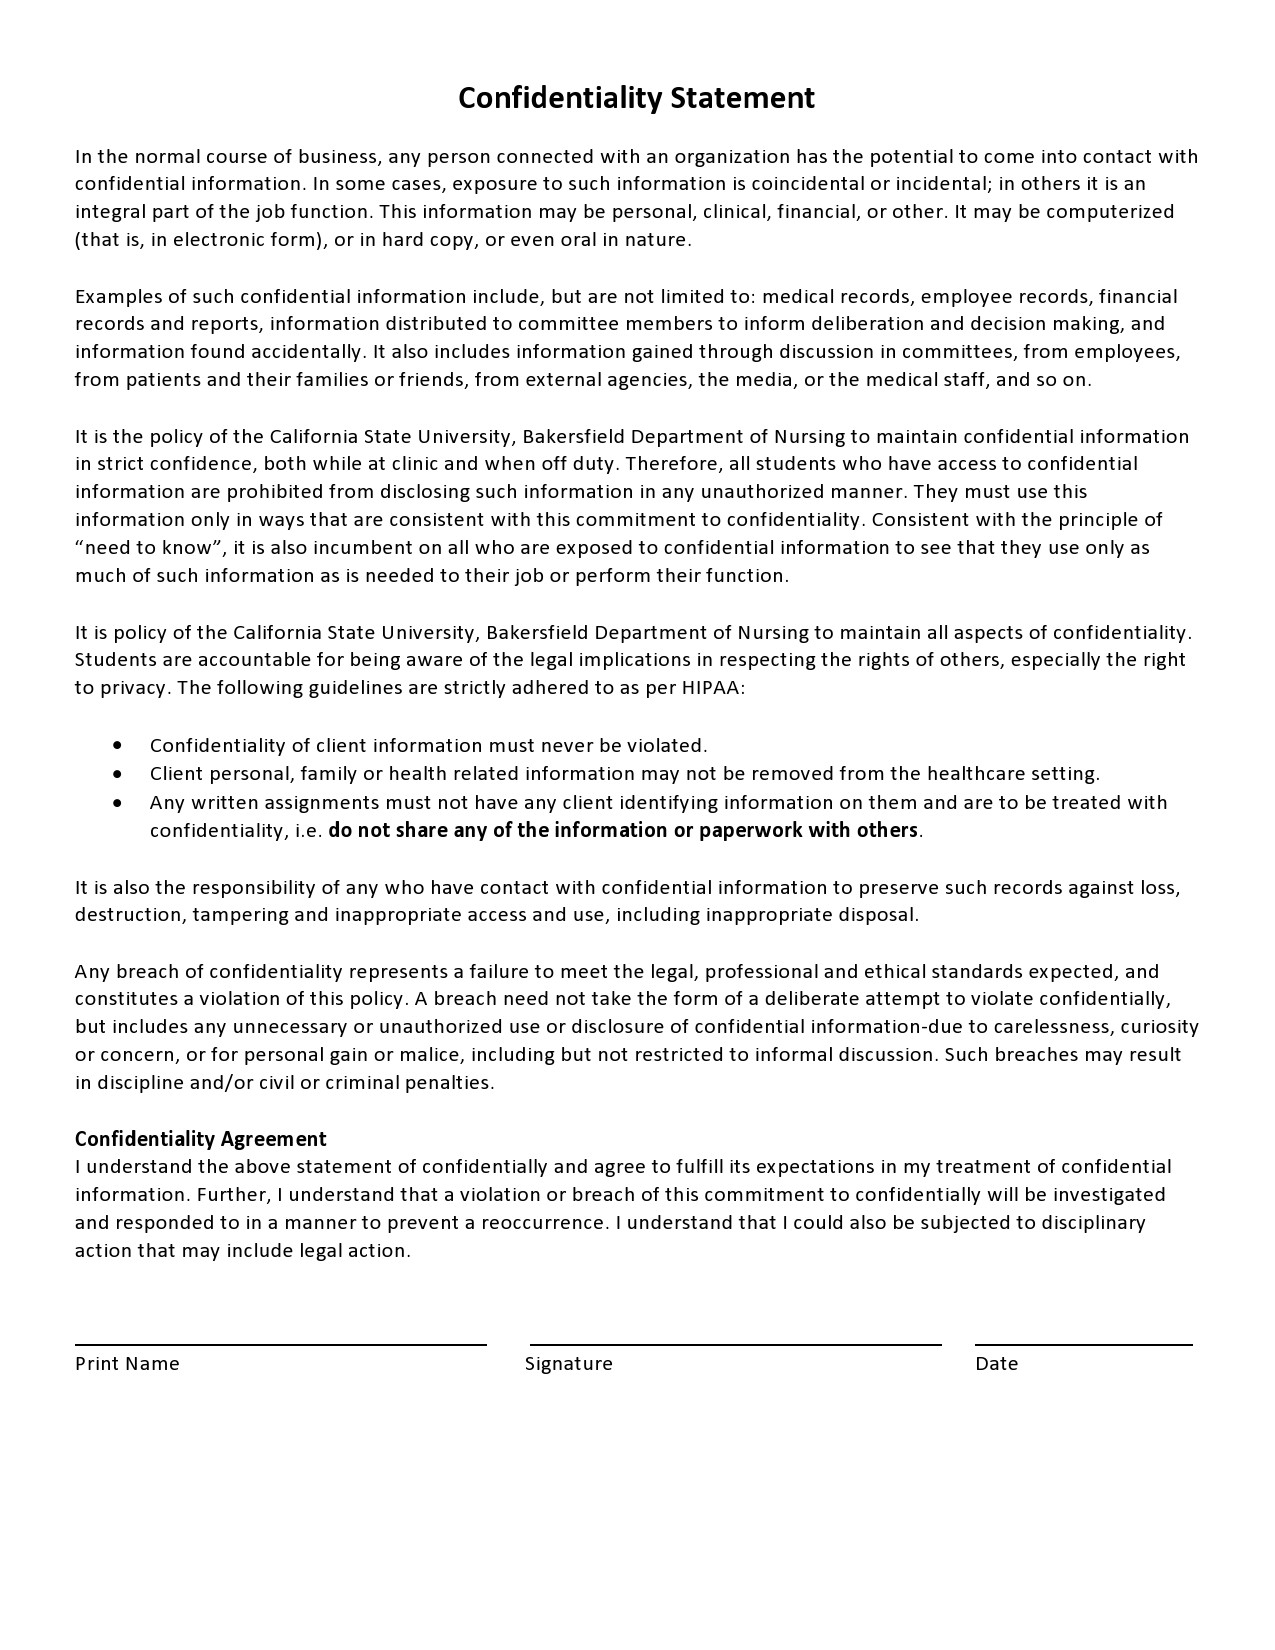 24 Simple Confidentiality Statement Agreement Templates 